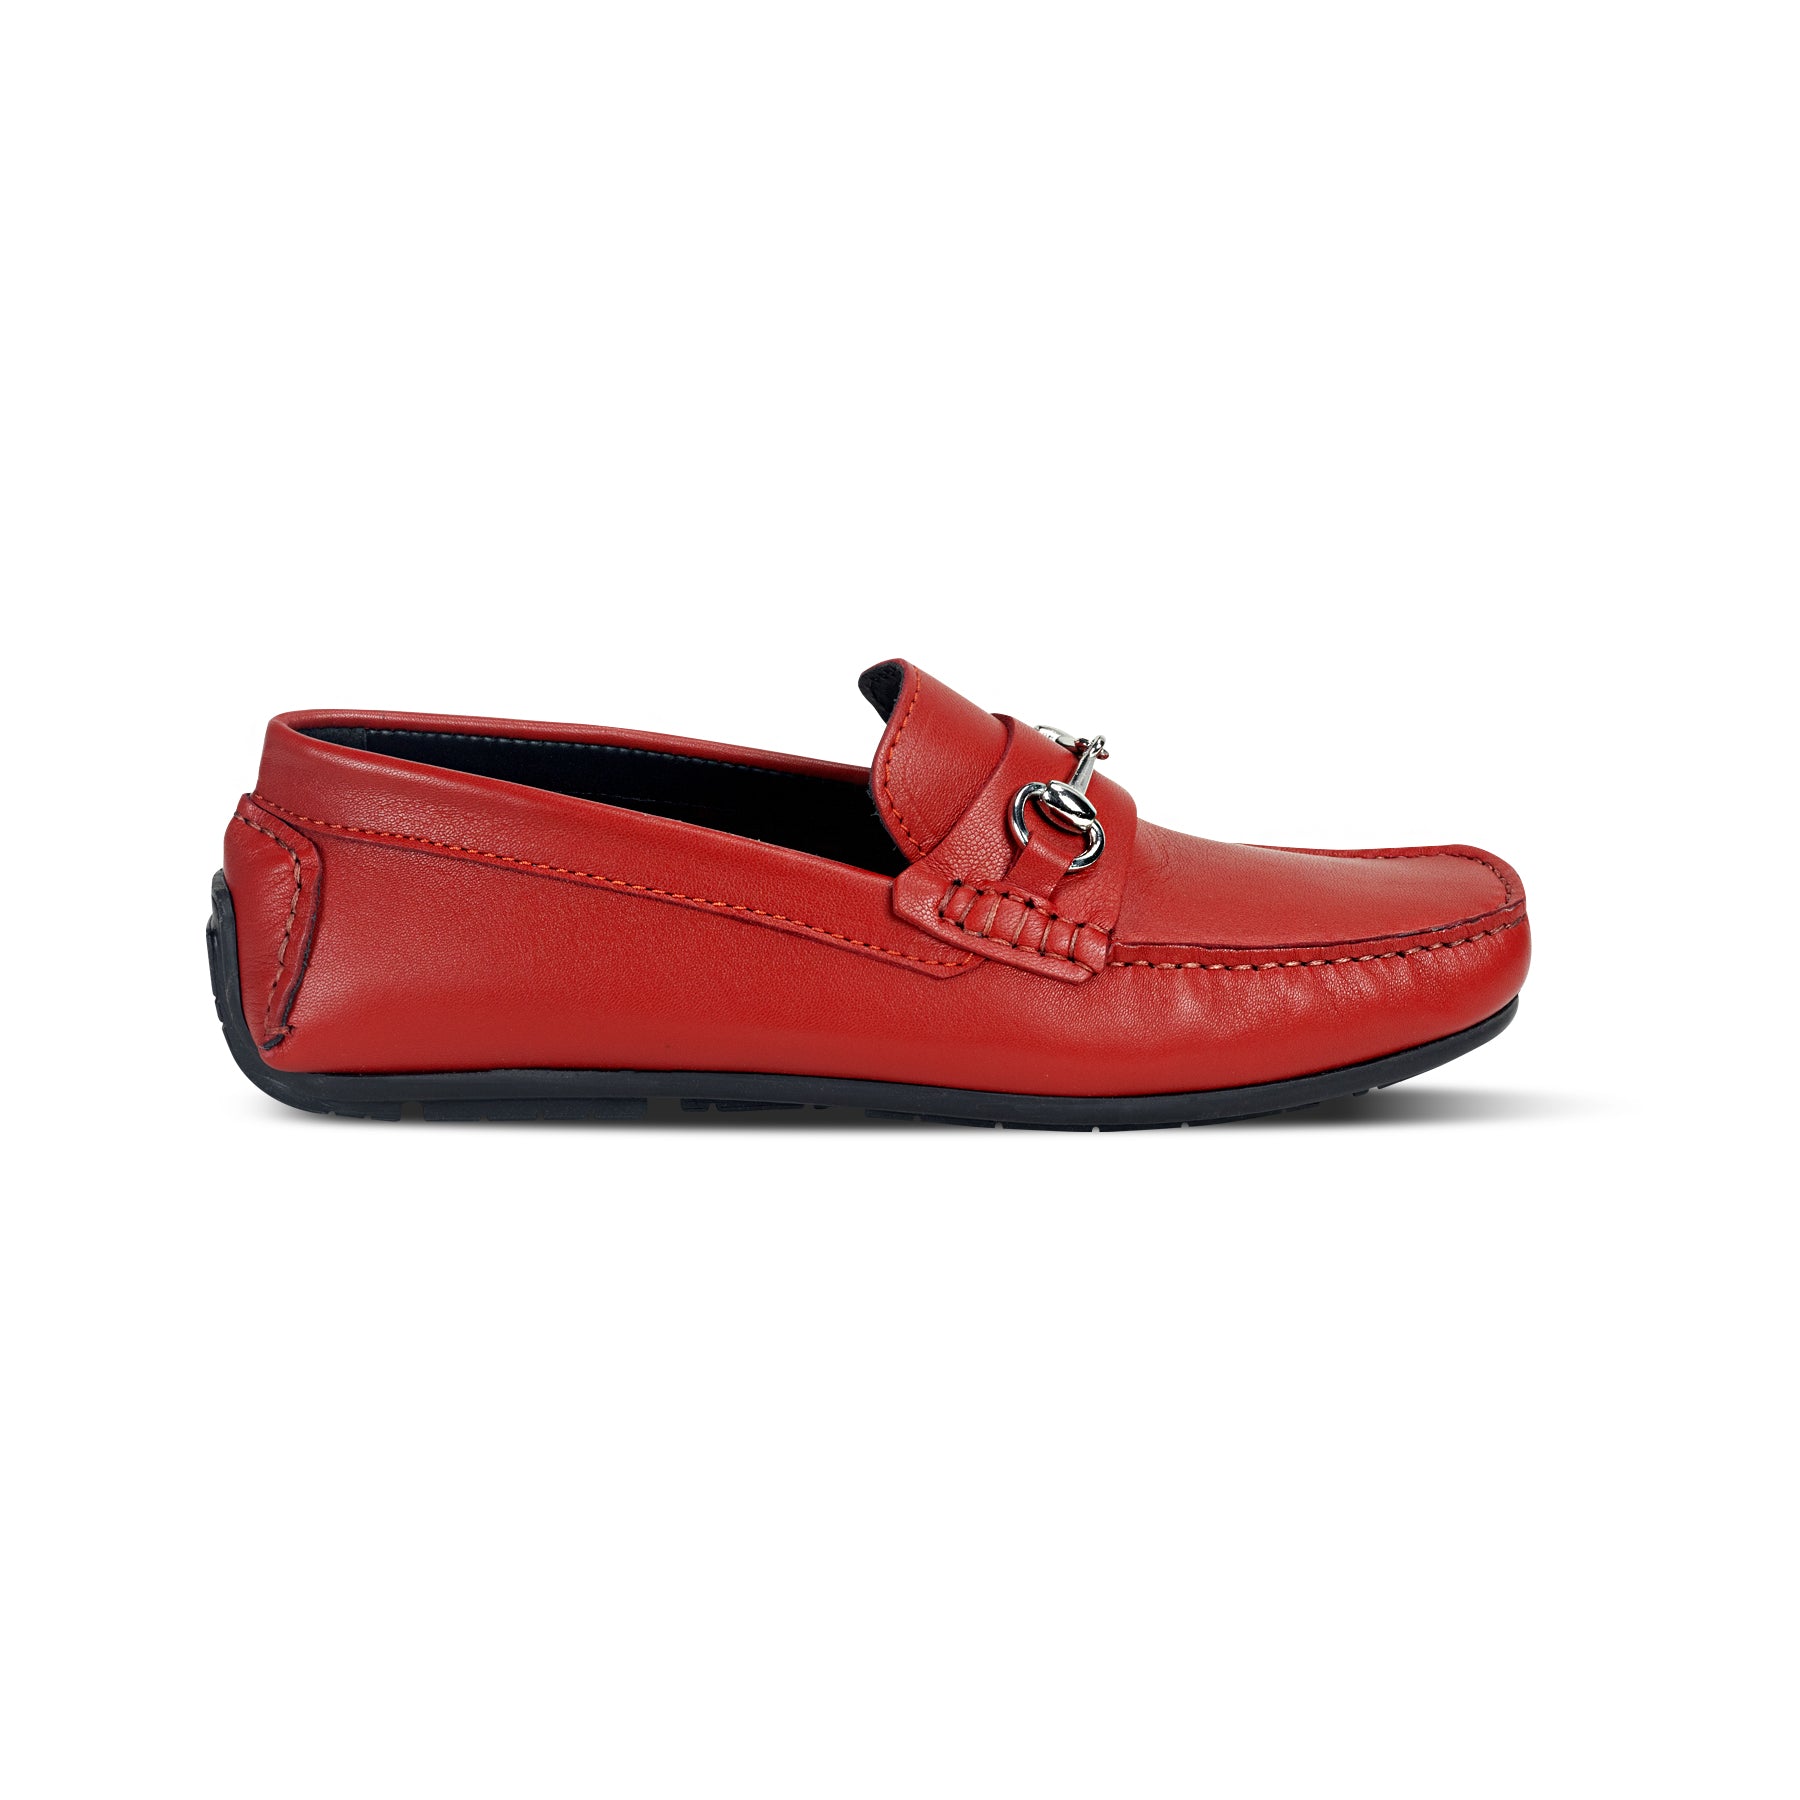 Adelie Driving Loafers